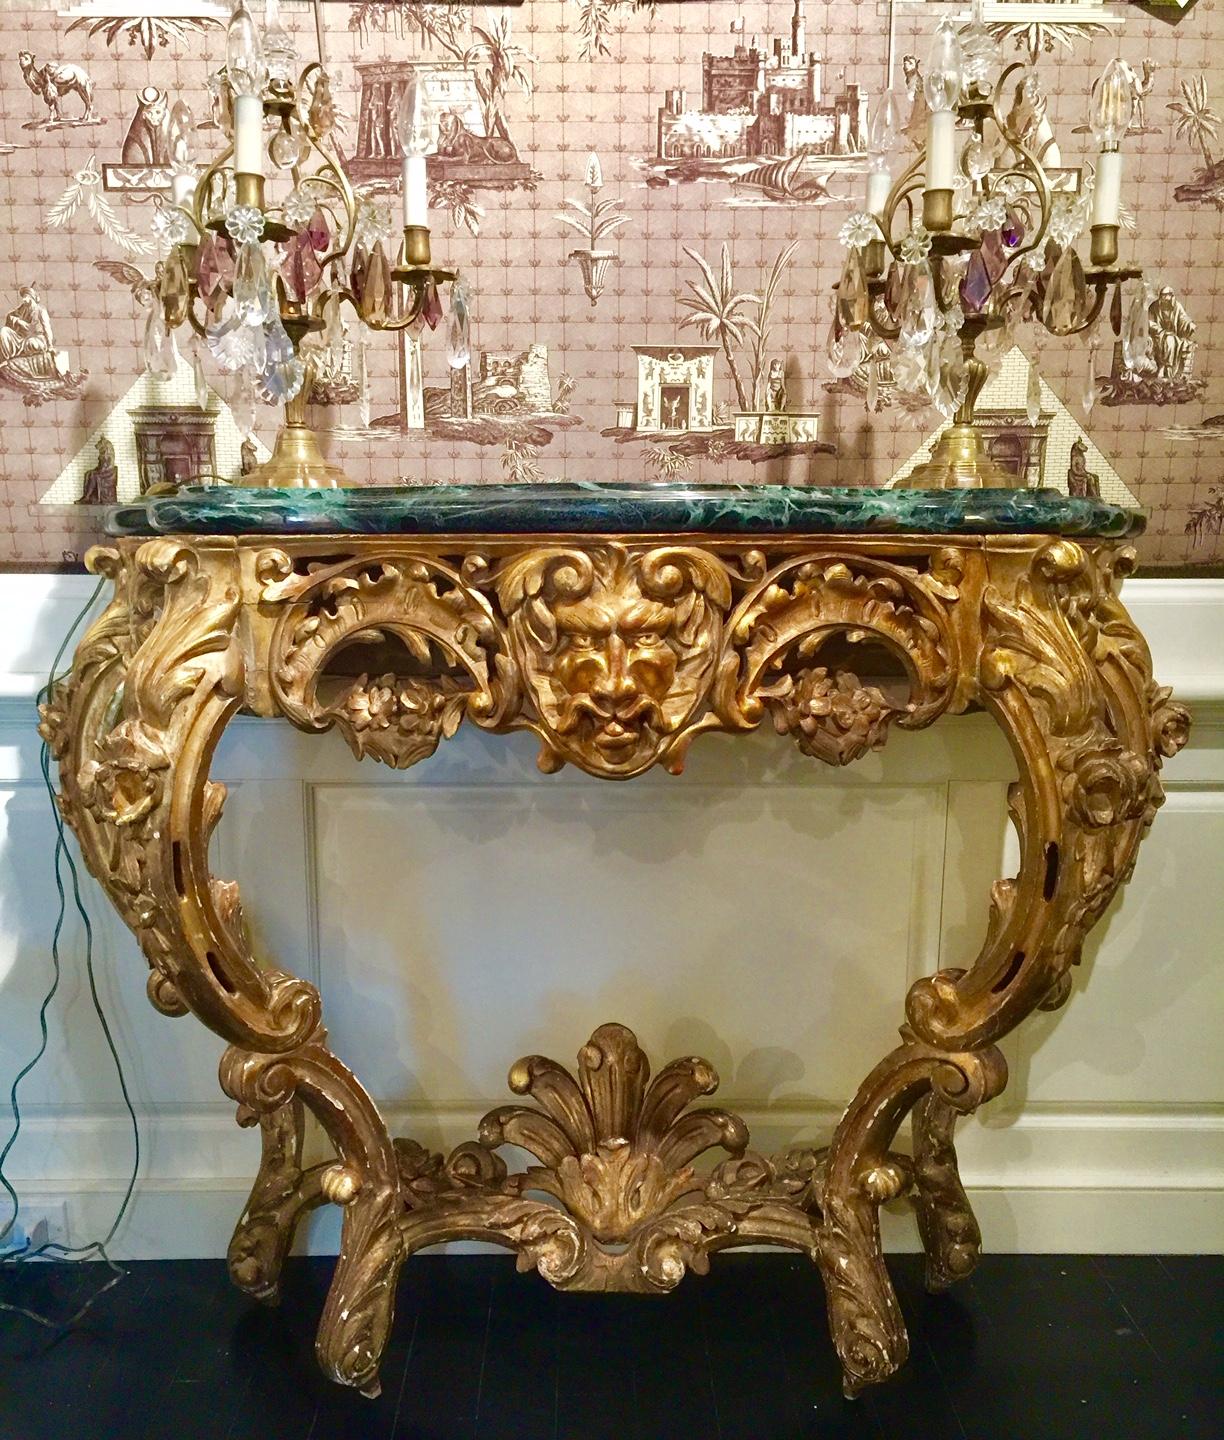 French Louis XV giltwood console, 18th century, green marble top
Rococo style with mascaron lion frieze, ornately sculpted, feathers joining the elegant legs. A beautiful model. Thick green marble top with white veins.

The gilding has been